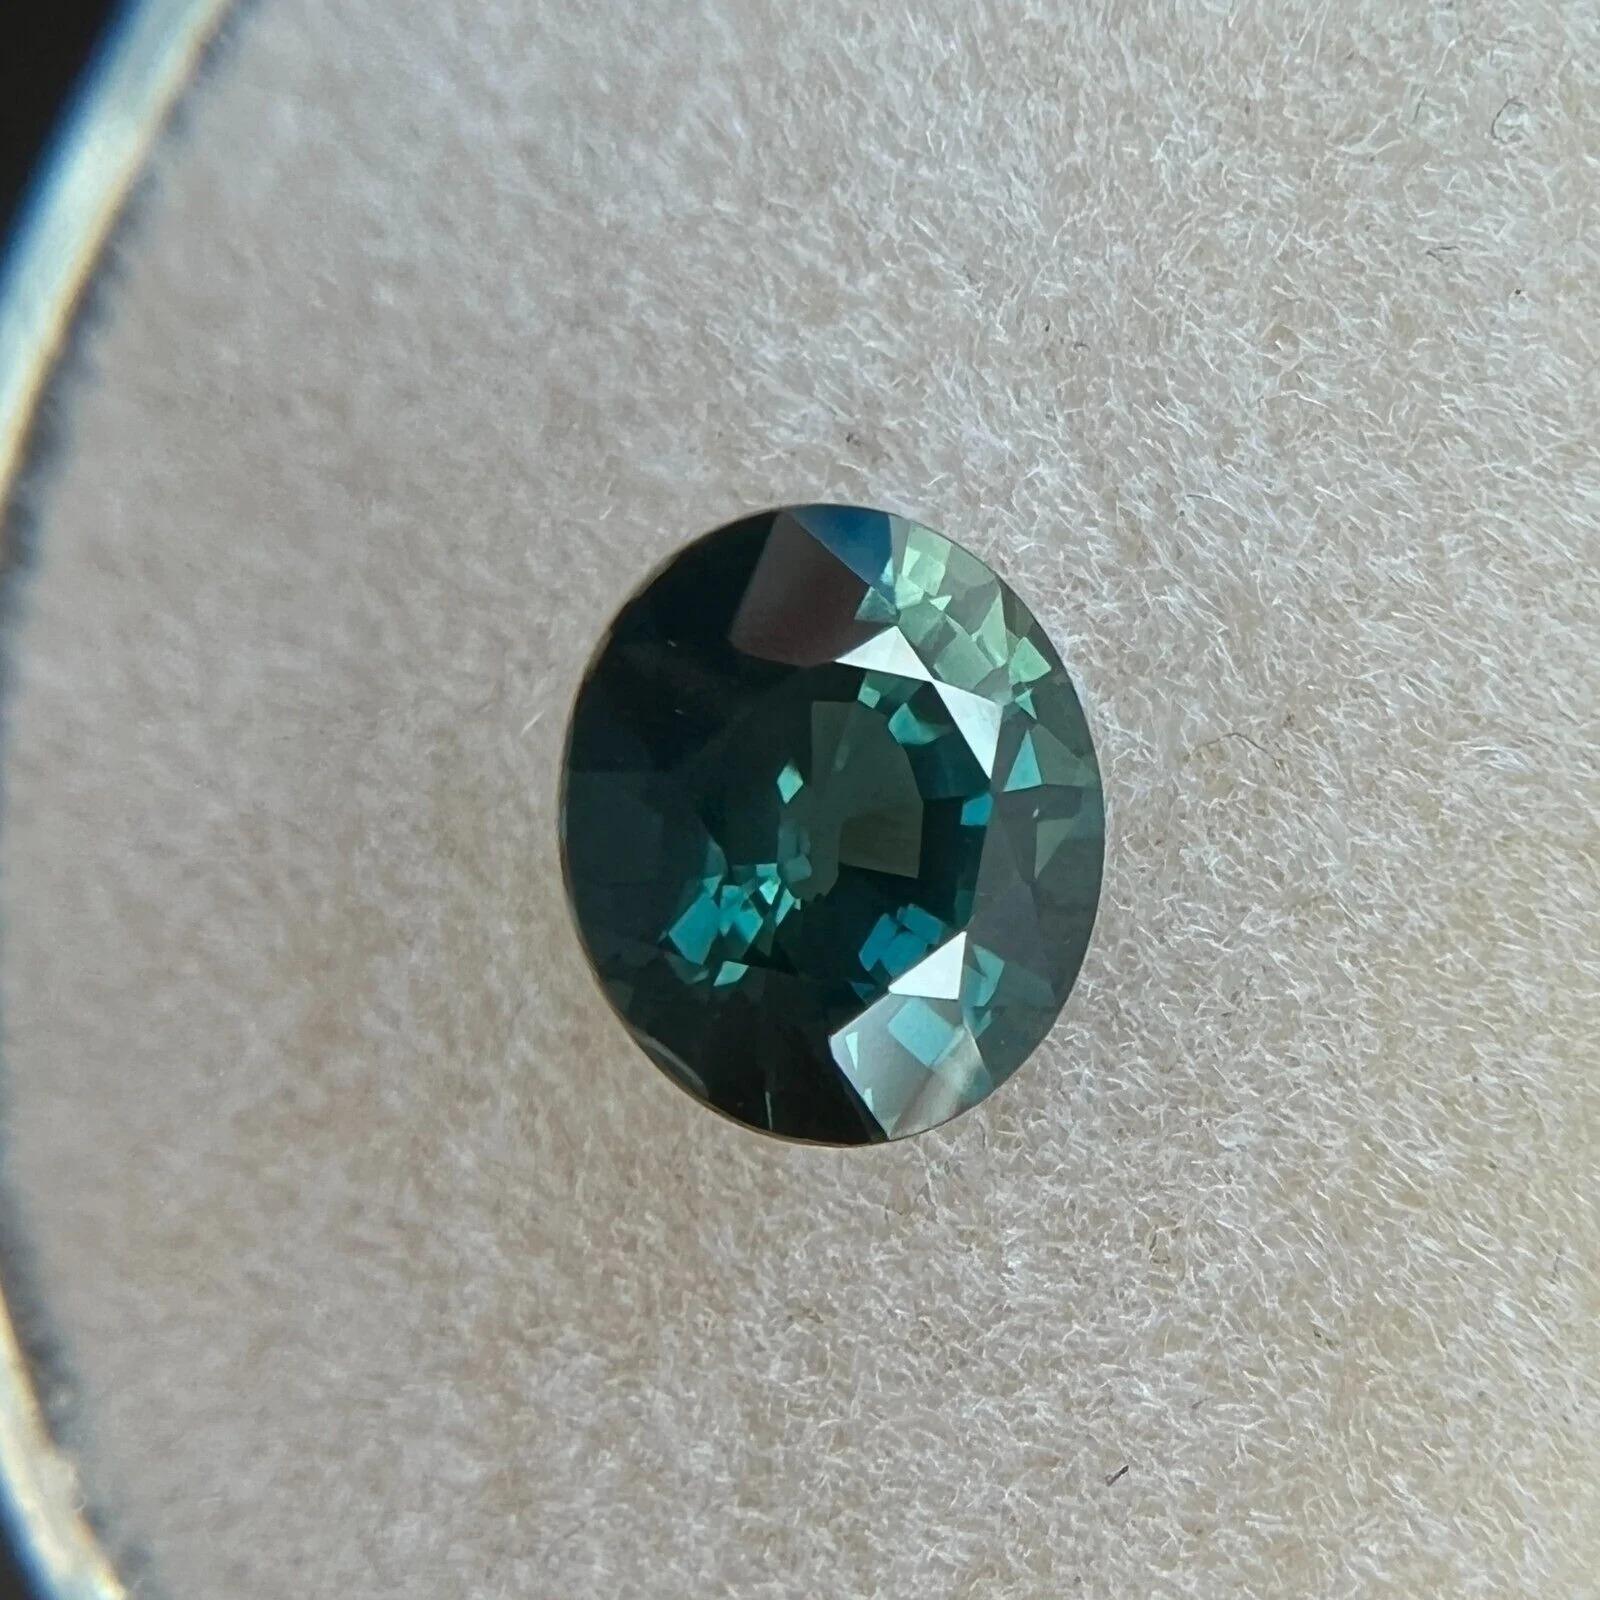 Fine 1.06ct Green Blue Natural Sapphire Oval Cut Loose Gem 6.4x5.6mm

Fine Natural Blue Green Sapphire Gemstone. 
1.06 carat with a beautiful deep bluish green colour and good clarity, a very clean stone. Also has an excellent oval cut and polish to